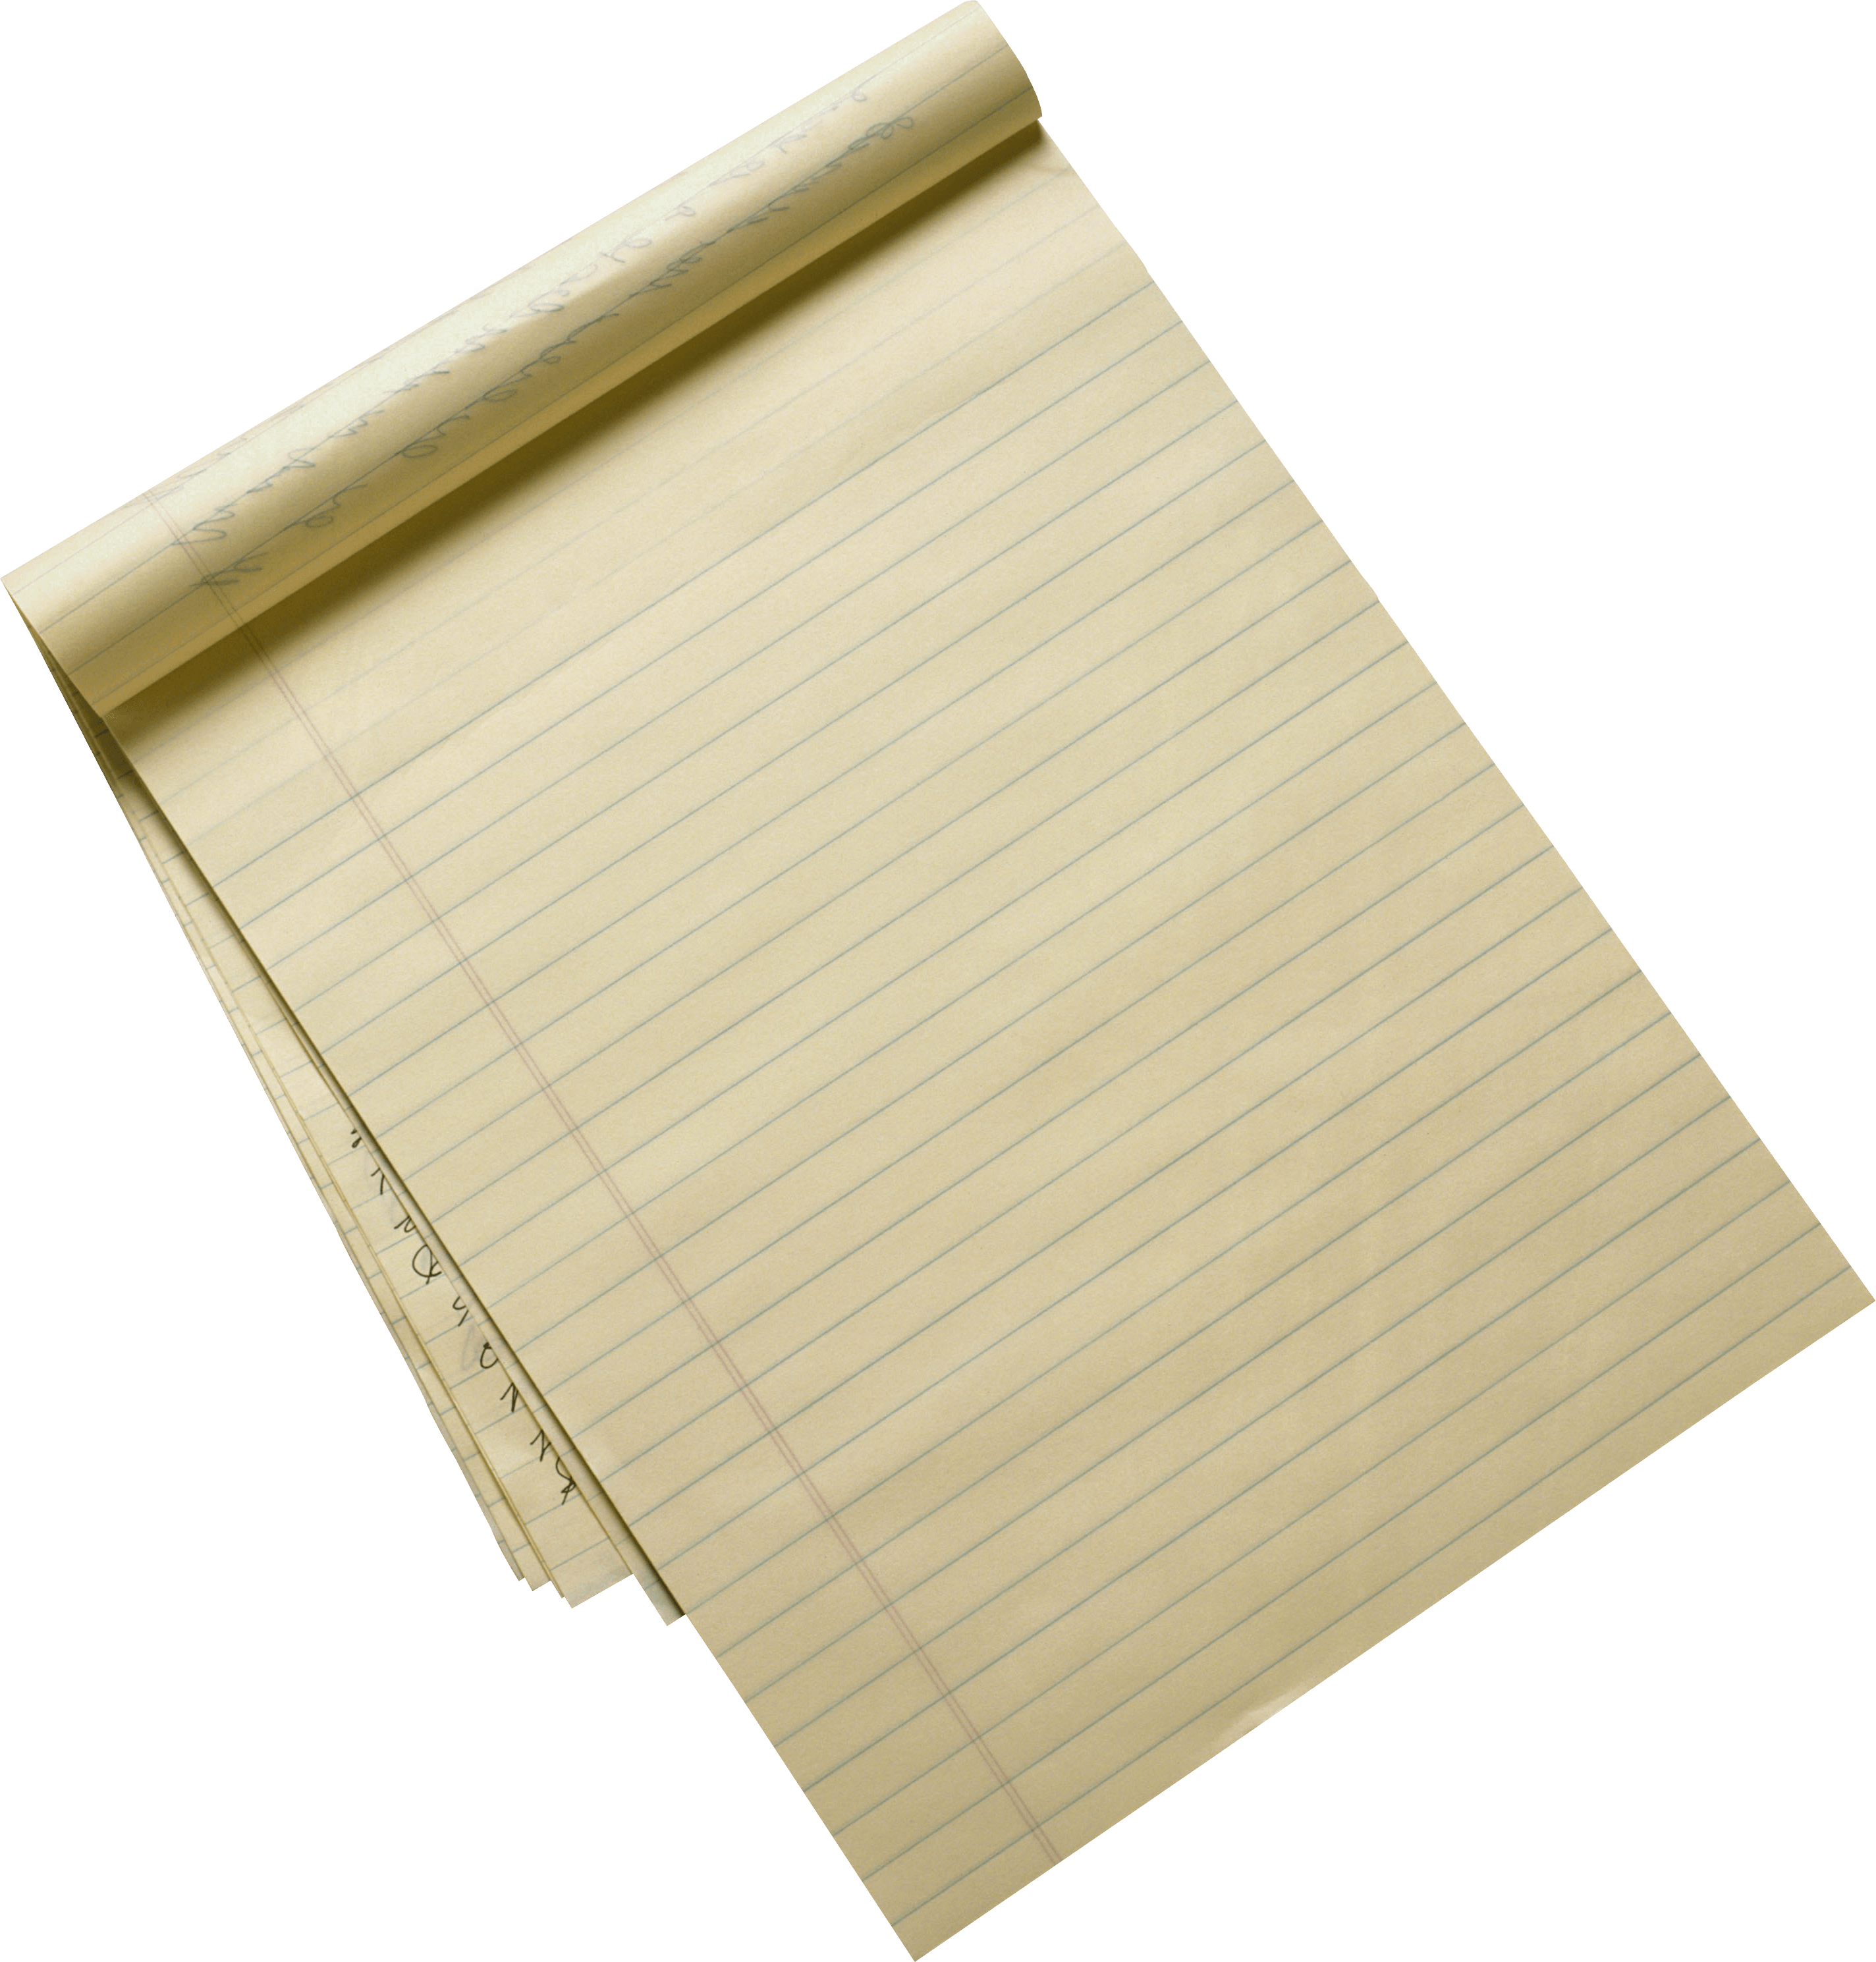 Paper Sheet Png Image Png Image - Paper Sheet, Transparent background PNG HD thumbnail